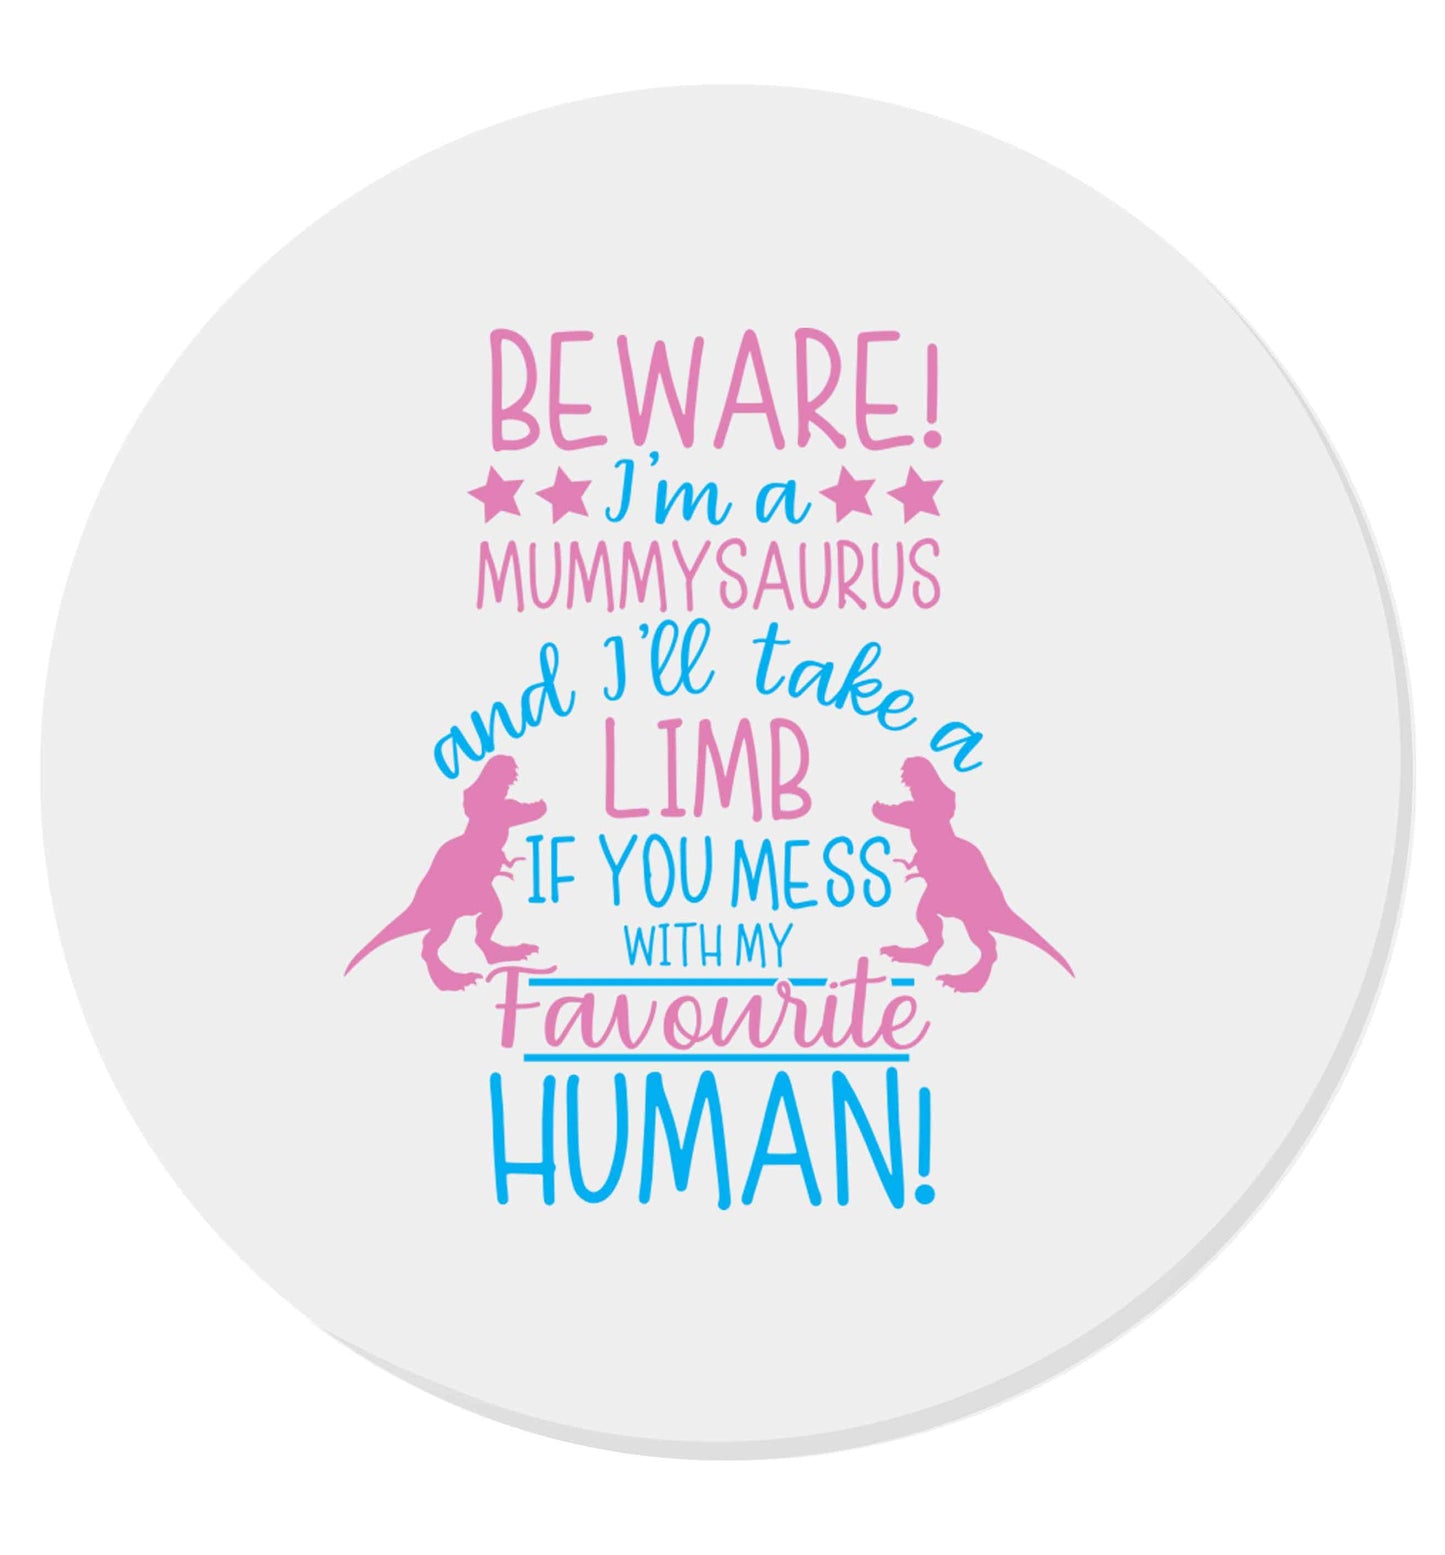 Perfect gift for any protective mummysaurus! Beware I'm a mummysaurus and I'll take a limb if you mess with my favourite human | Magnet